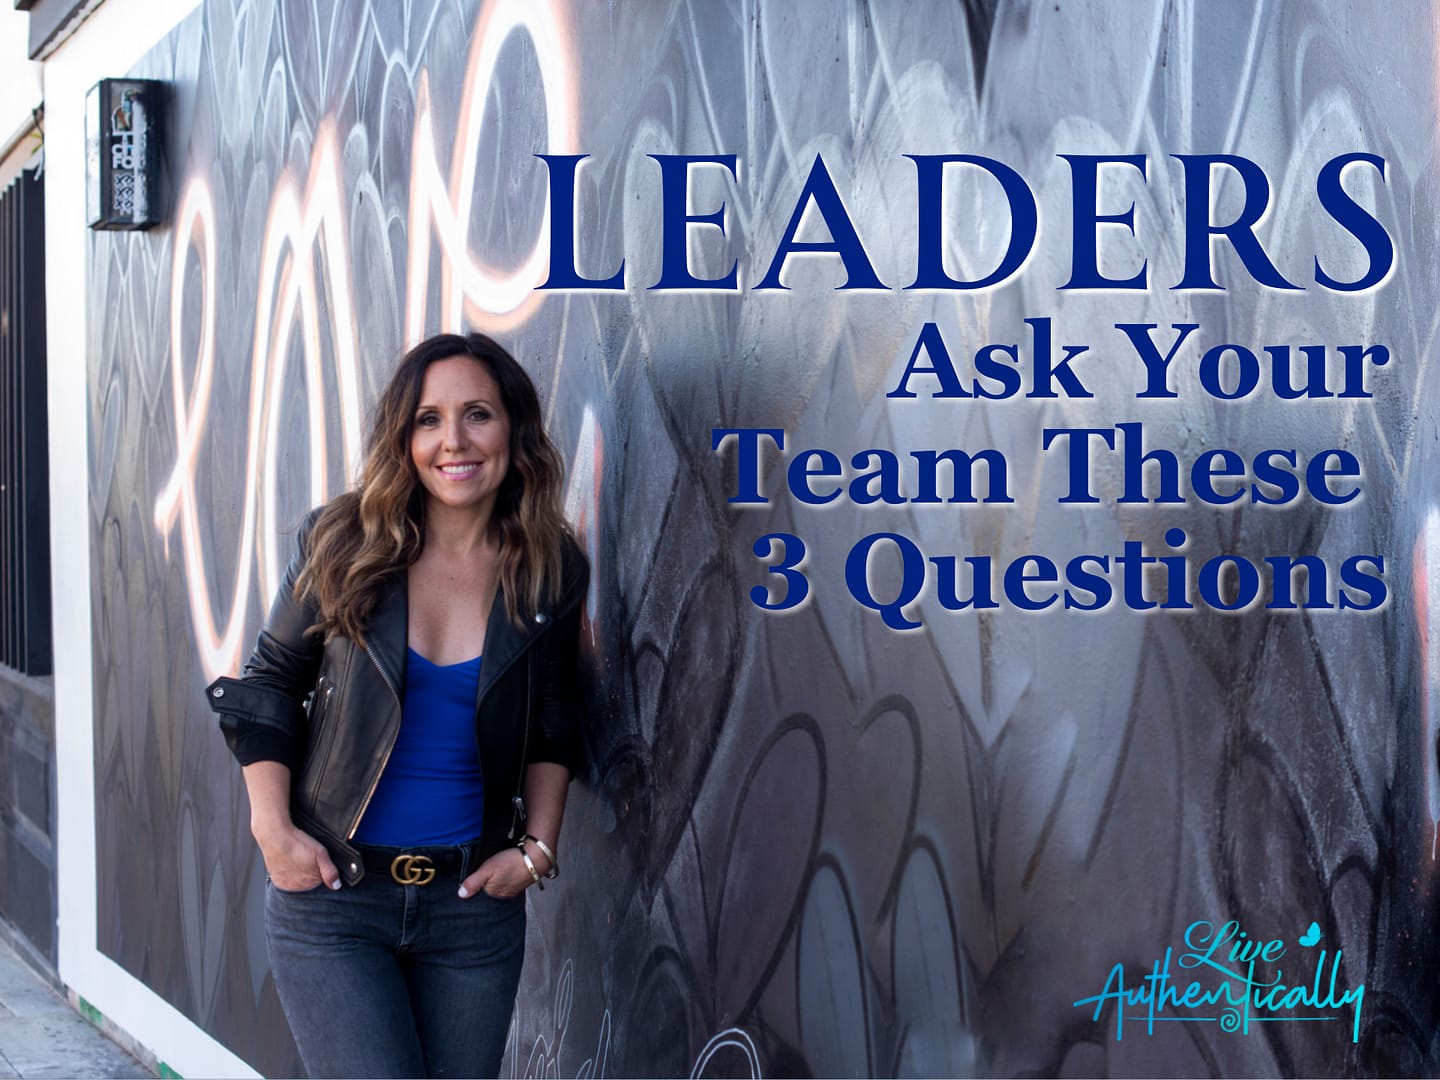 Leaders - Ask Your Team These 3 Questions